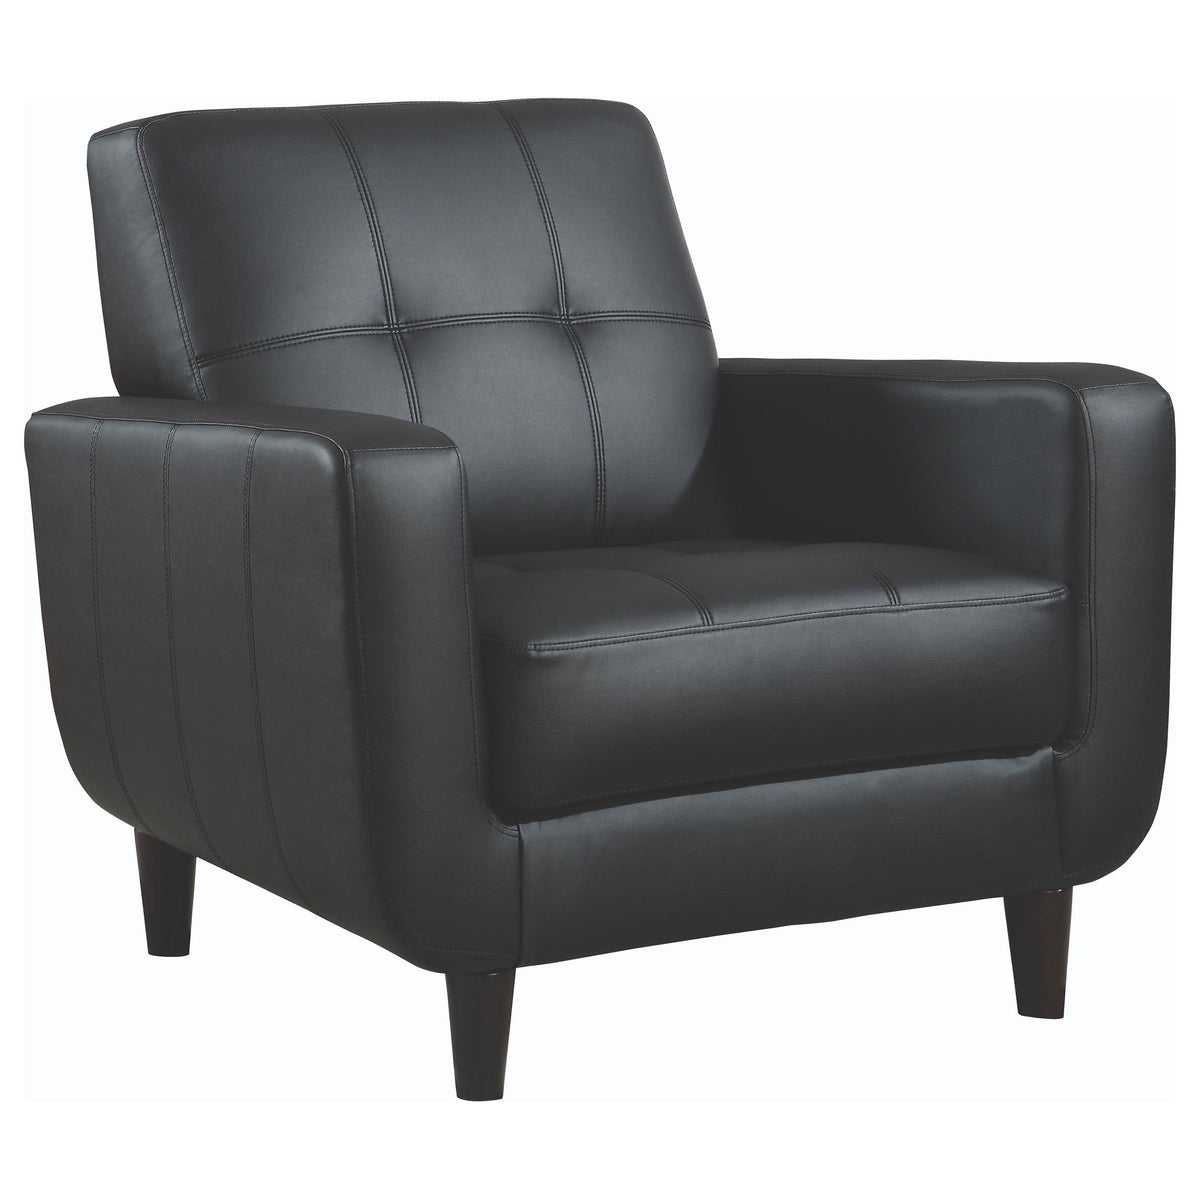 Aaron Padded Seat Accent Chair Black Aaron Padded Seat Accent Chair Black Half Price Furniture